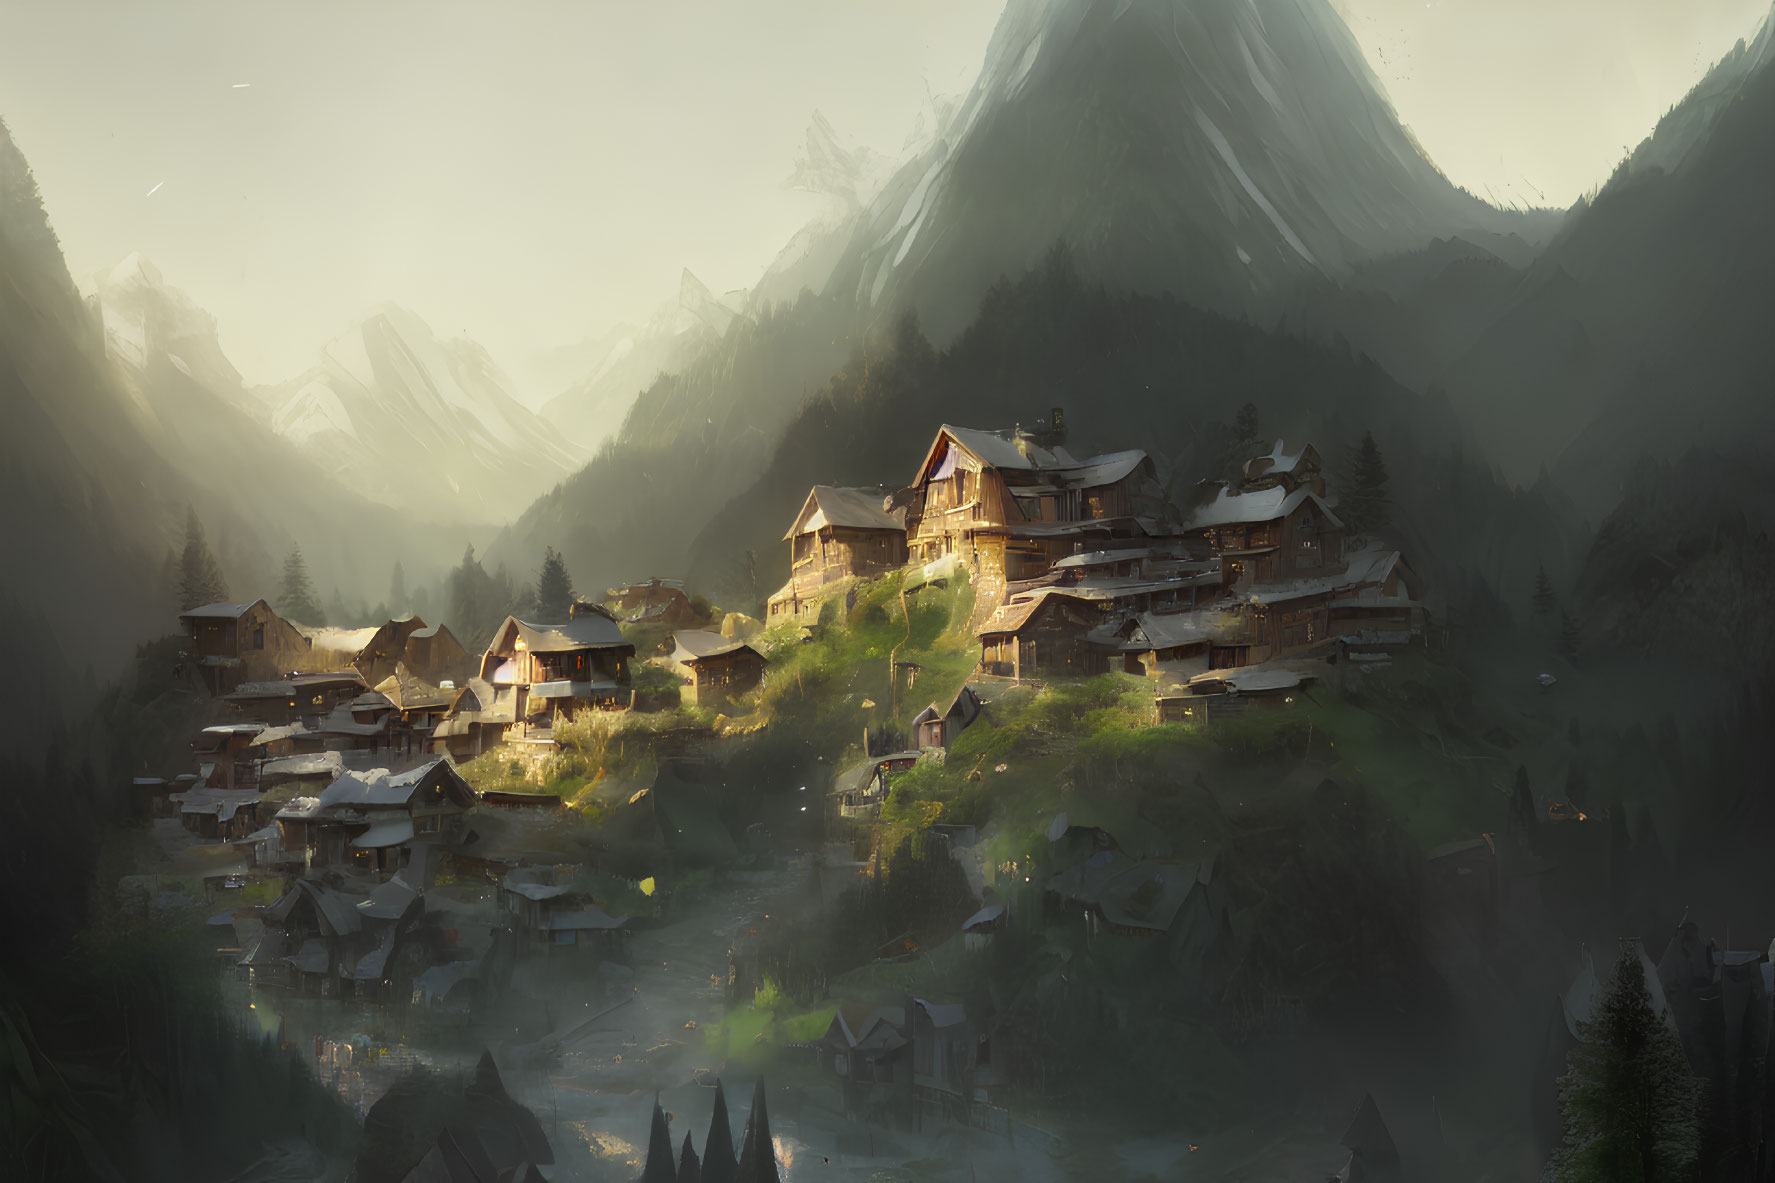 Scenic mountain village with rustic houses and misty peaks